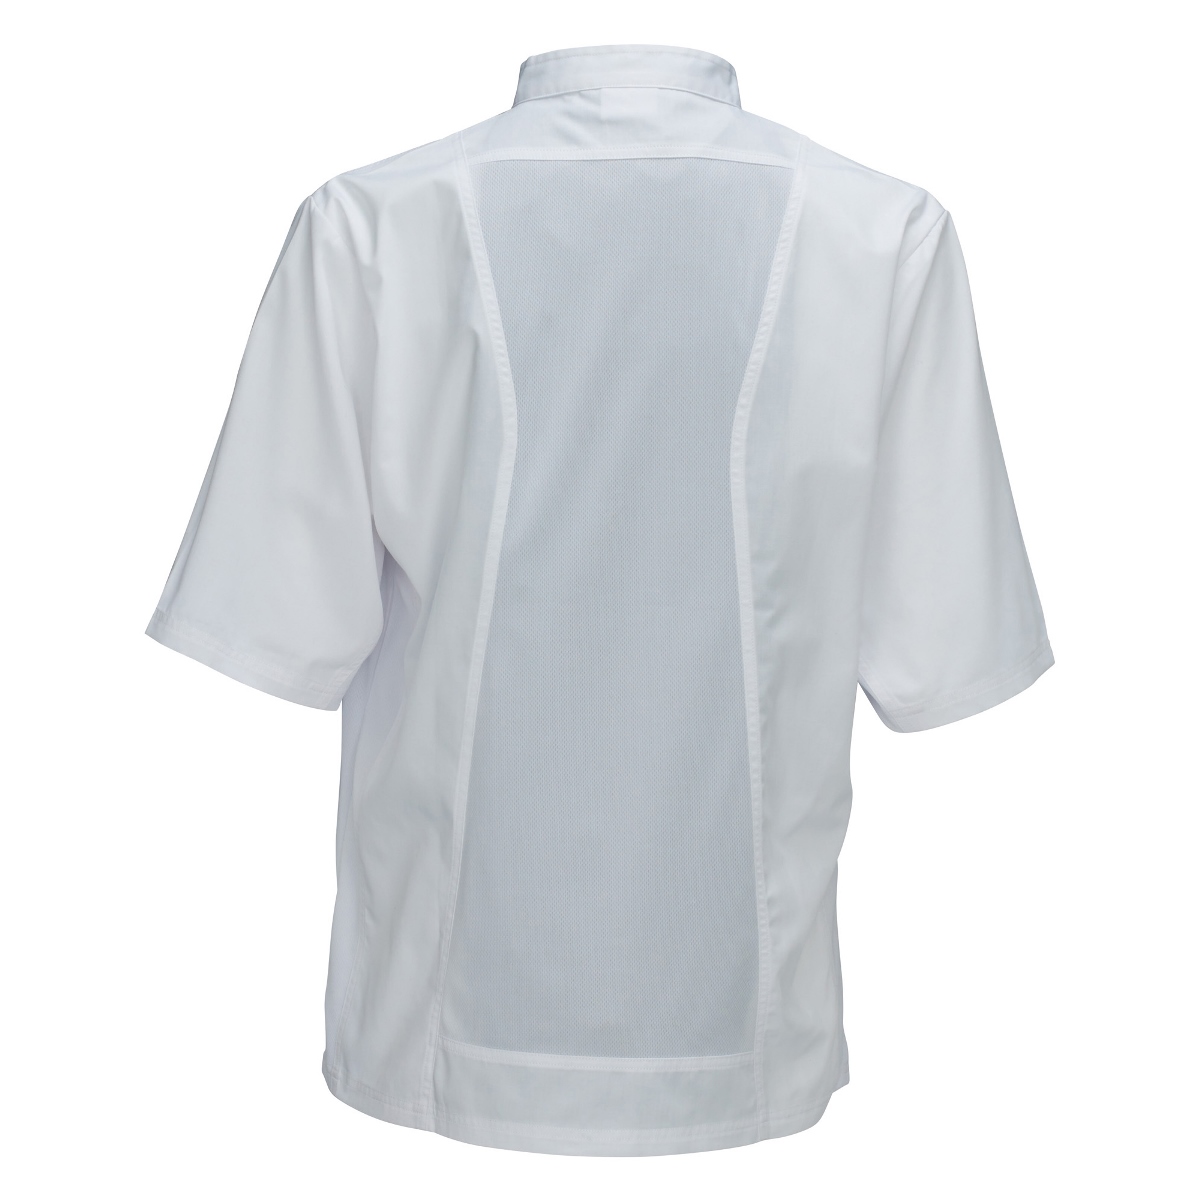 Winco UNF-9WM Broadway Ventilated Cook's Shirt image 1